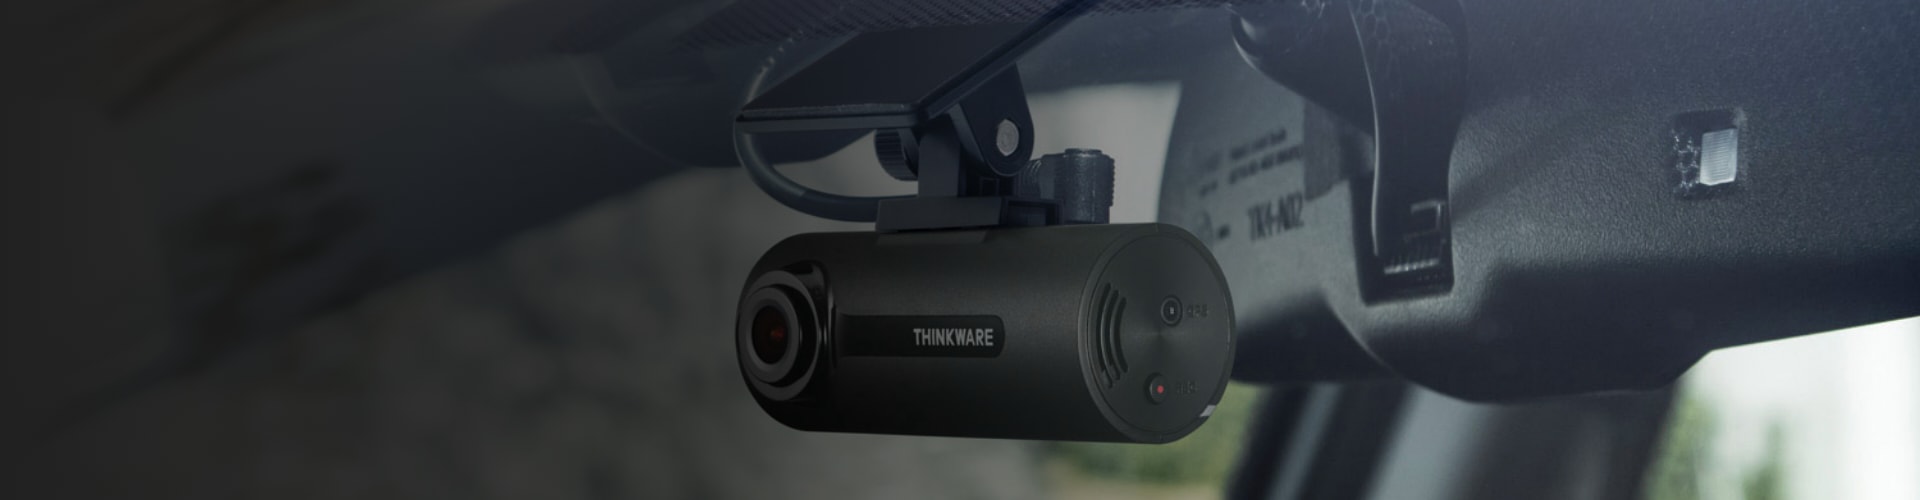 Thinkware Dash Cam F70  Front and Rear Traffic Recording